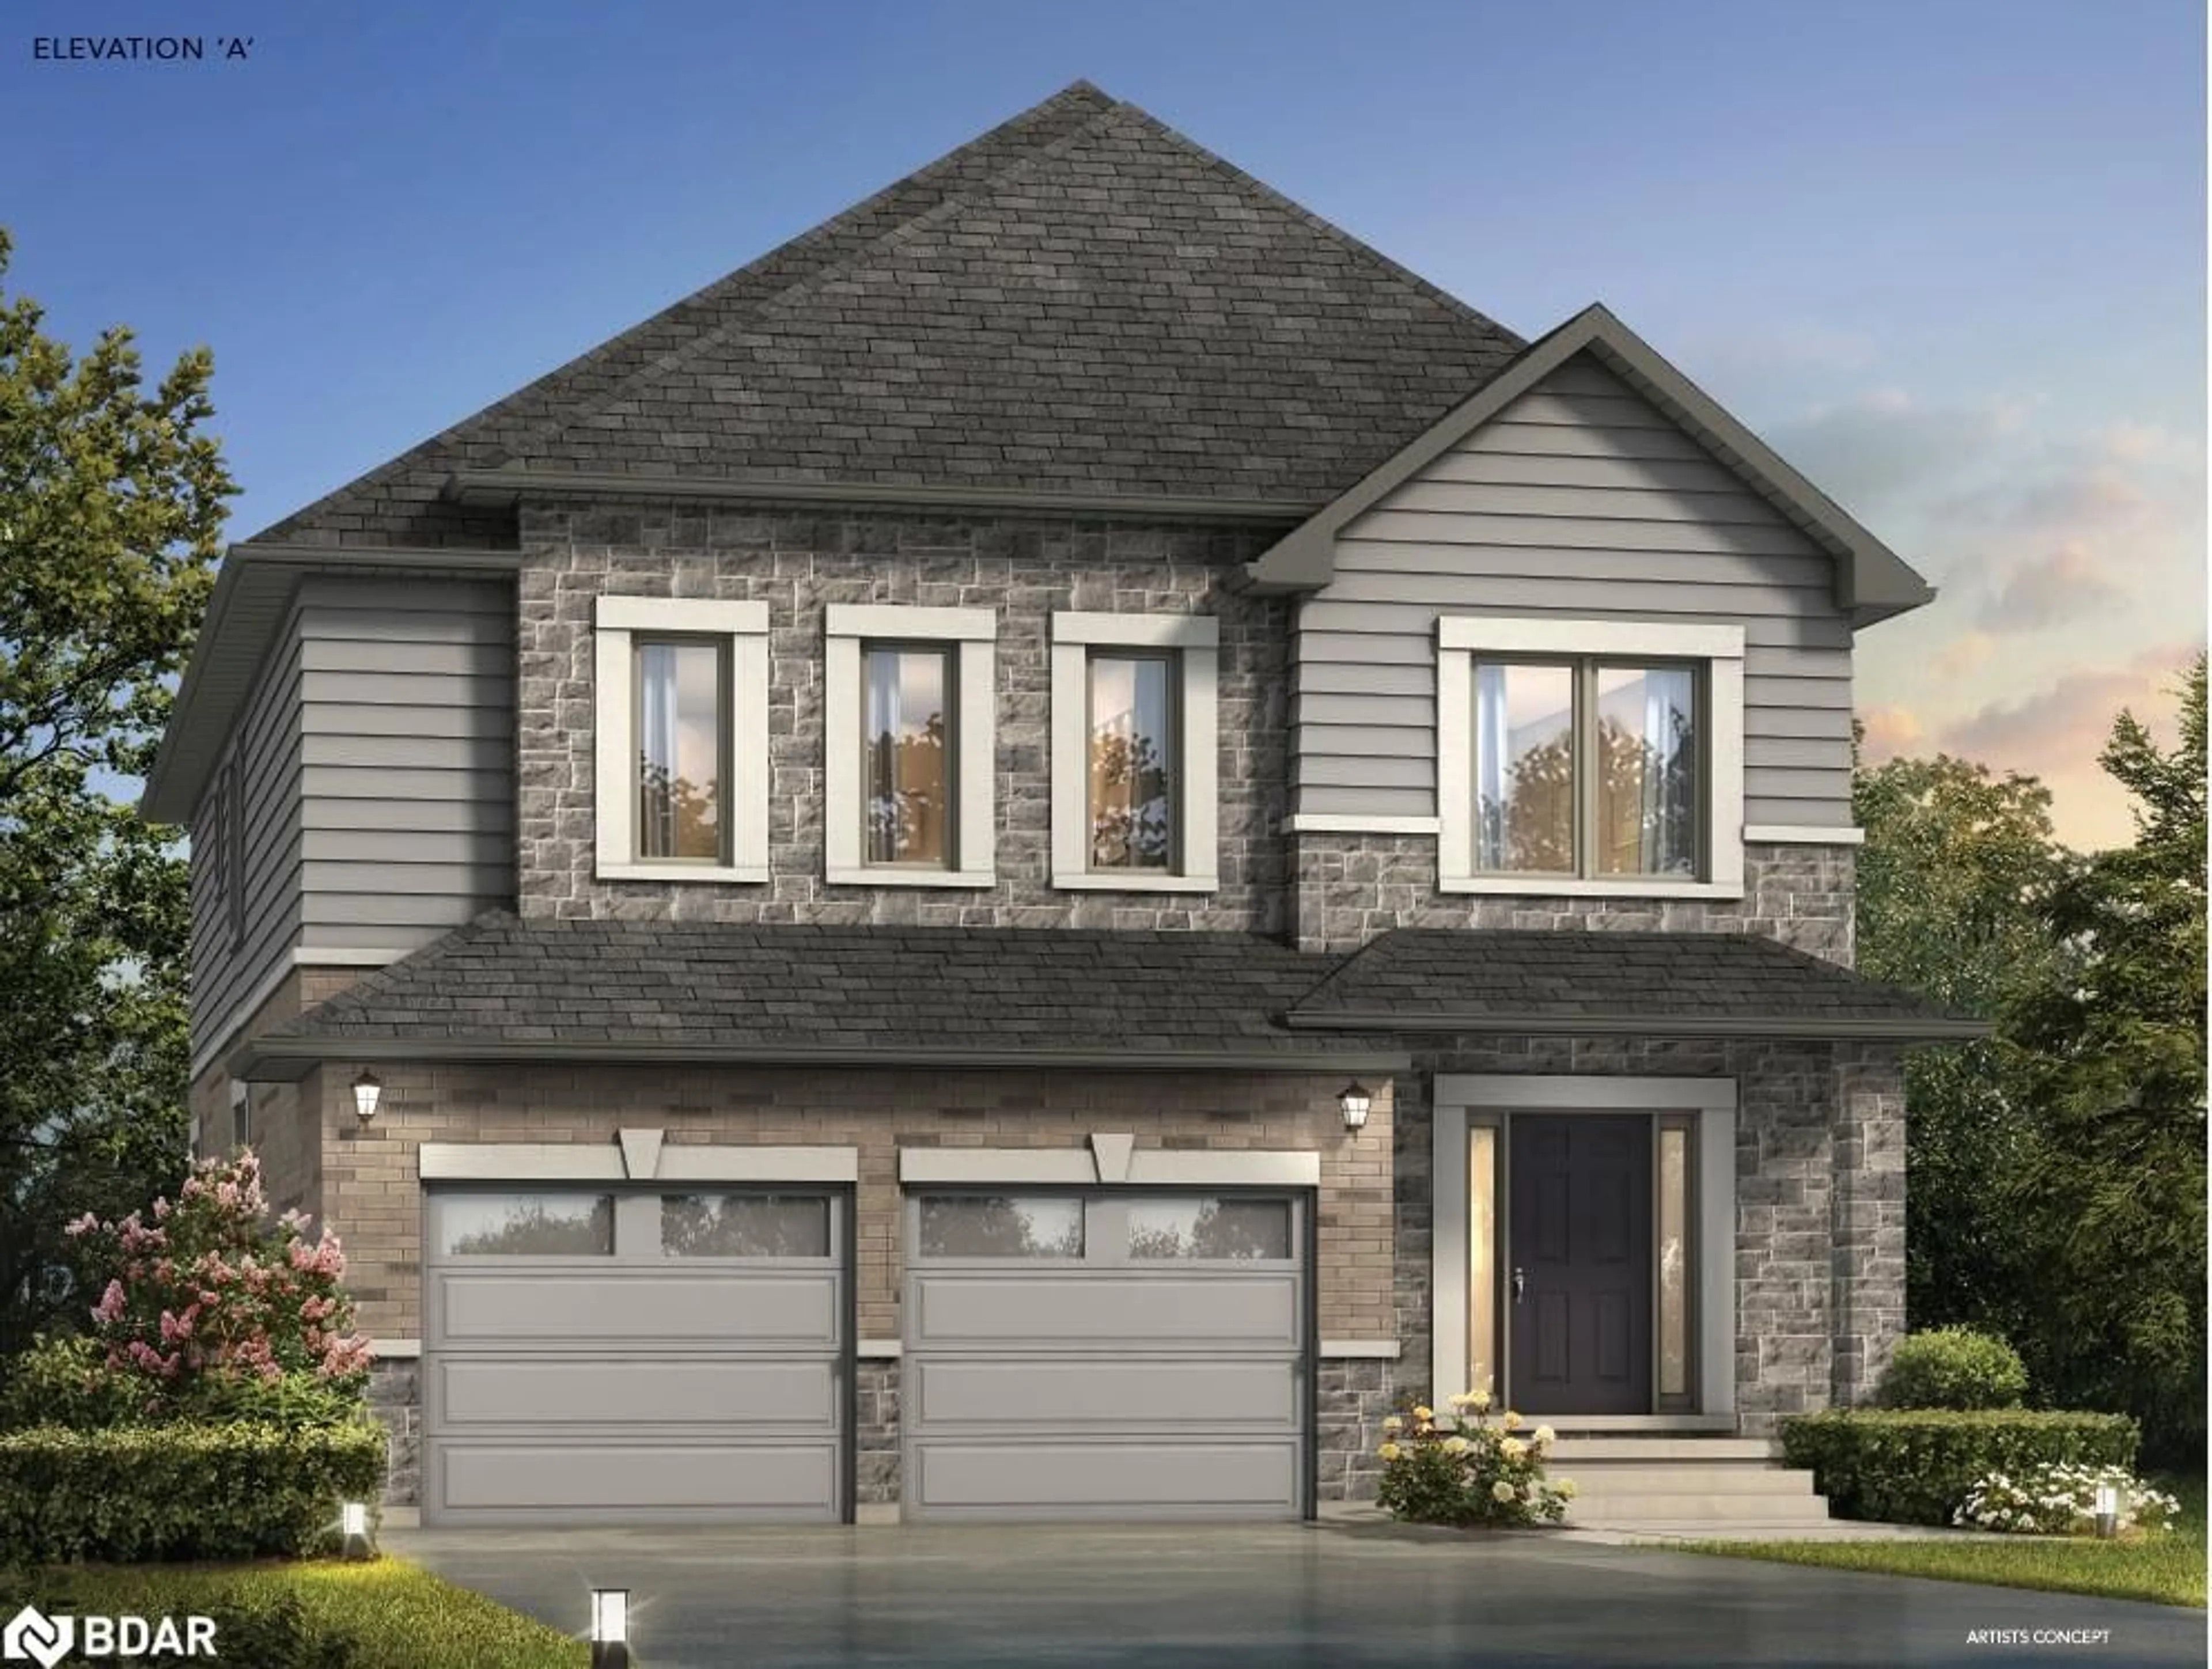 Home with brick exterior material for LOT 43 Orion Blvd, Orillia Ontario L3V 6H2